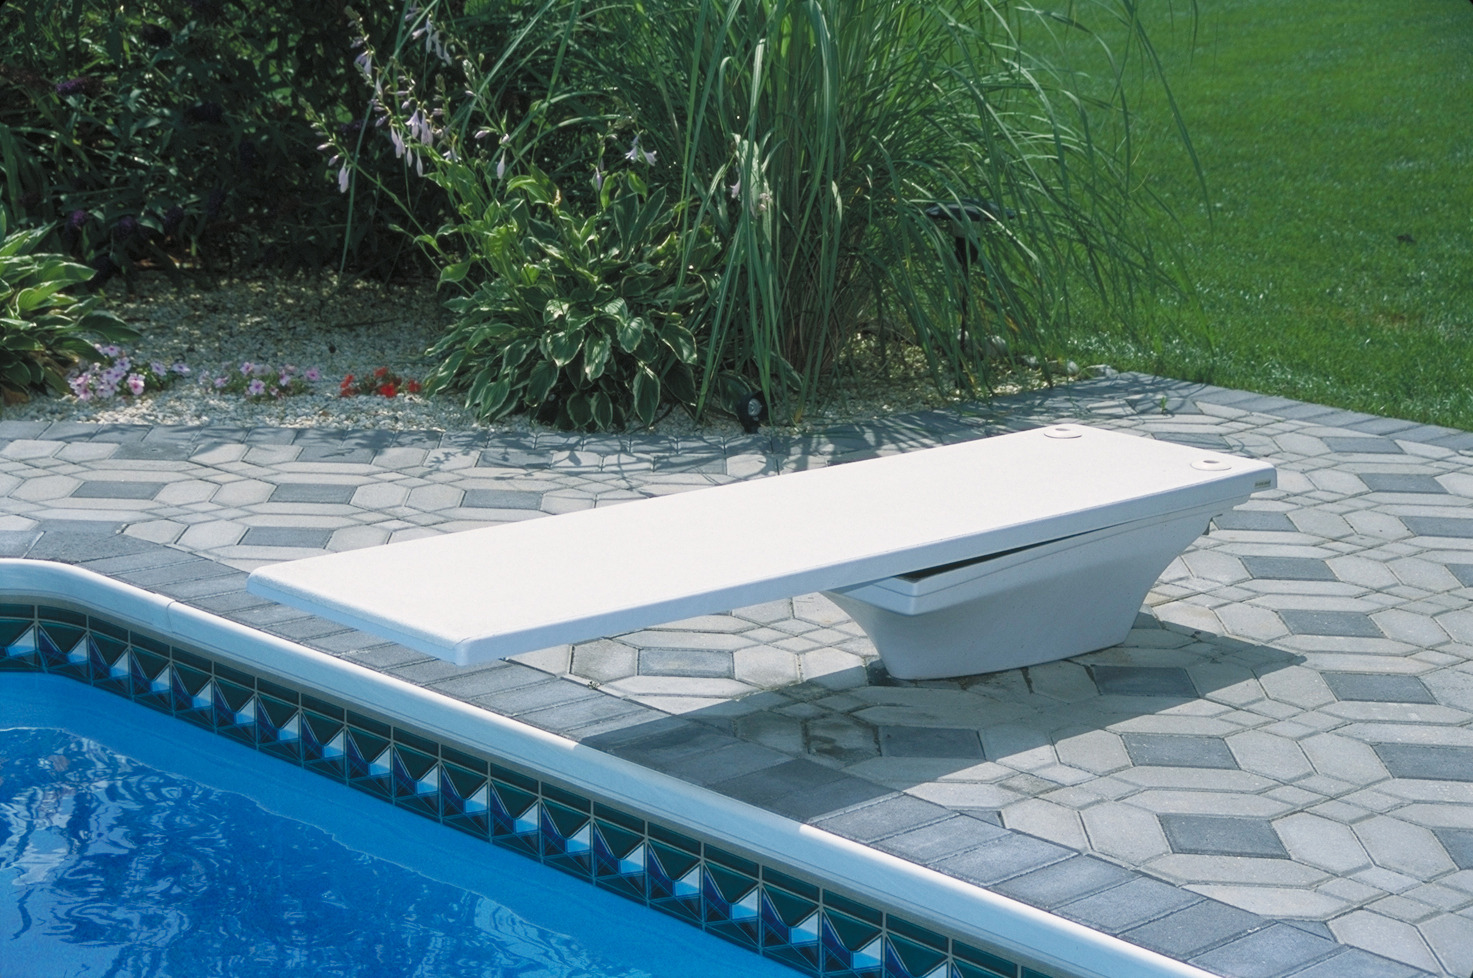 S.r. Smith Flyte-deck Ii Stand With Frontier Iii Diving Board, Radiant White